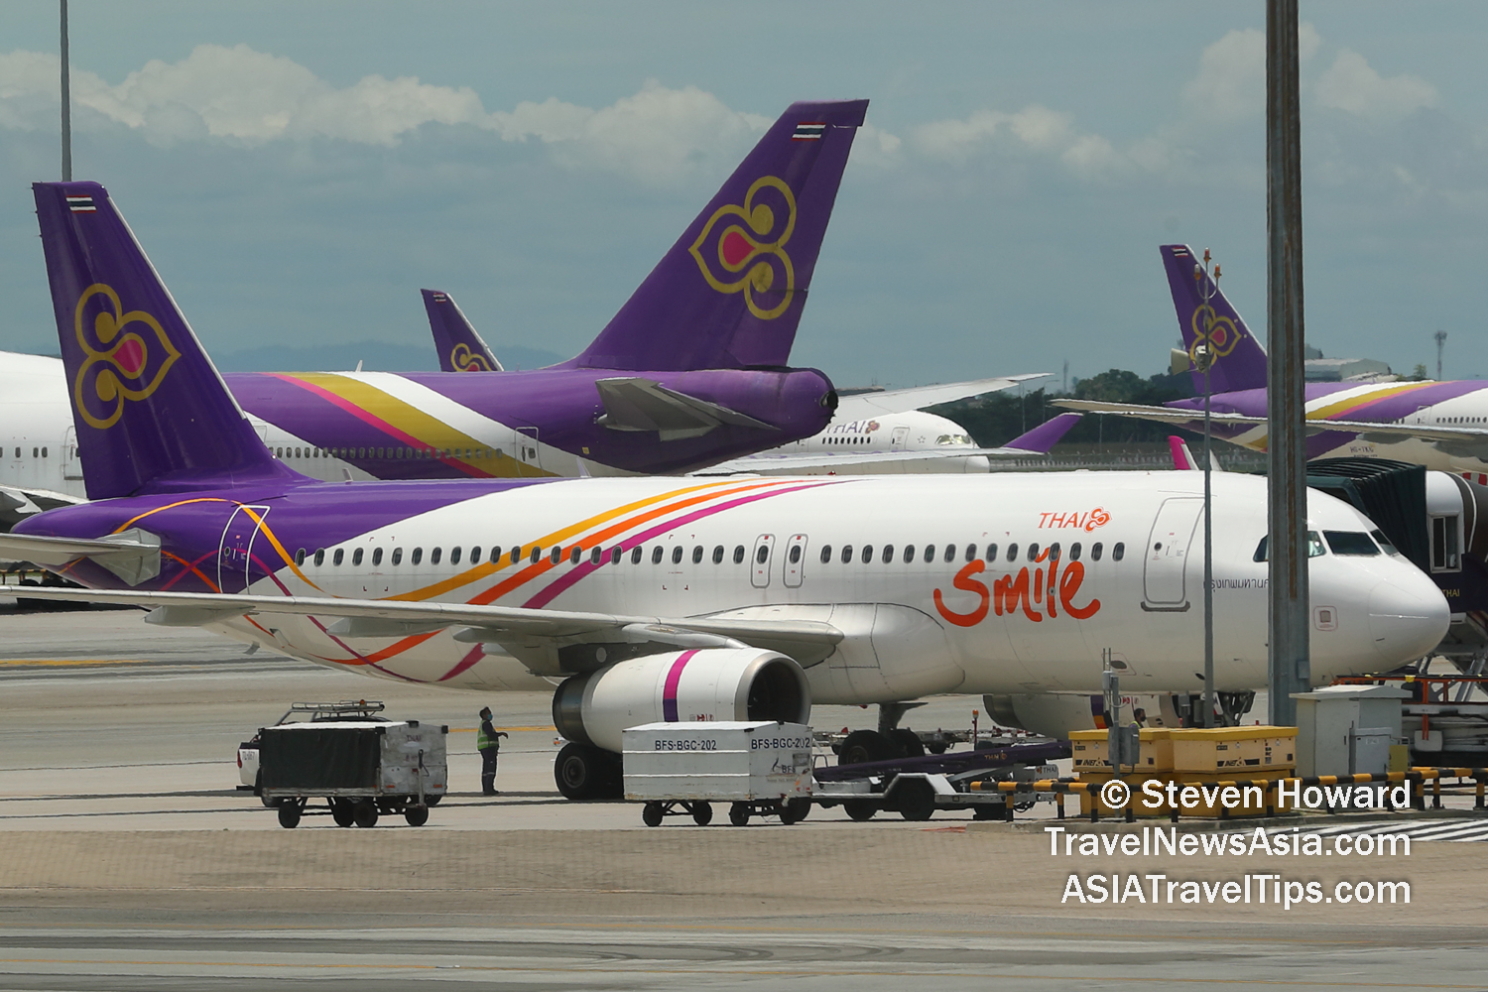 Thai Airways and Thai Smile Aircraft at BKK. Picture by Steven Howard of TravelNewsAsia.com Click to enlarge.